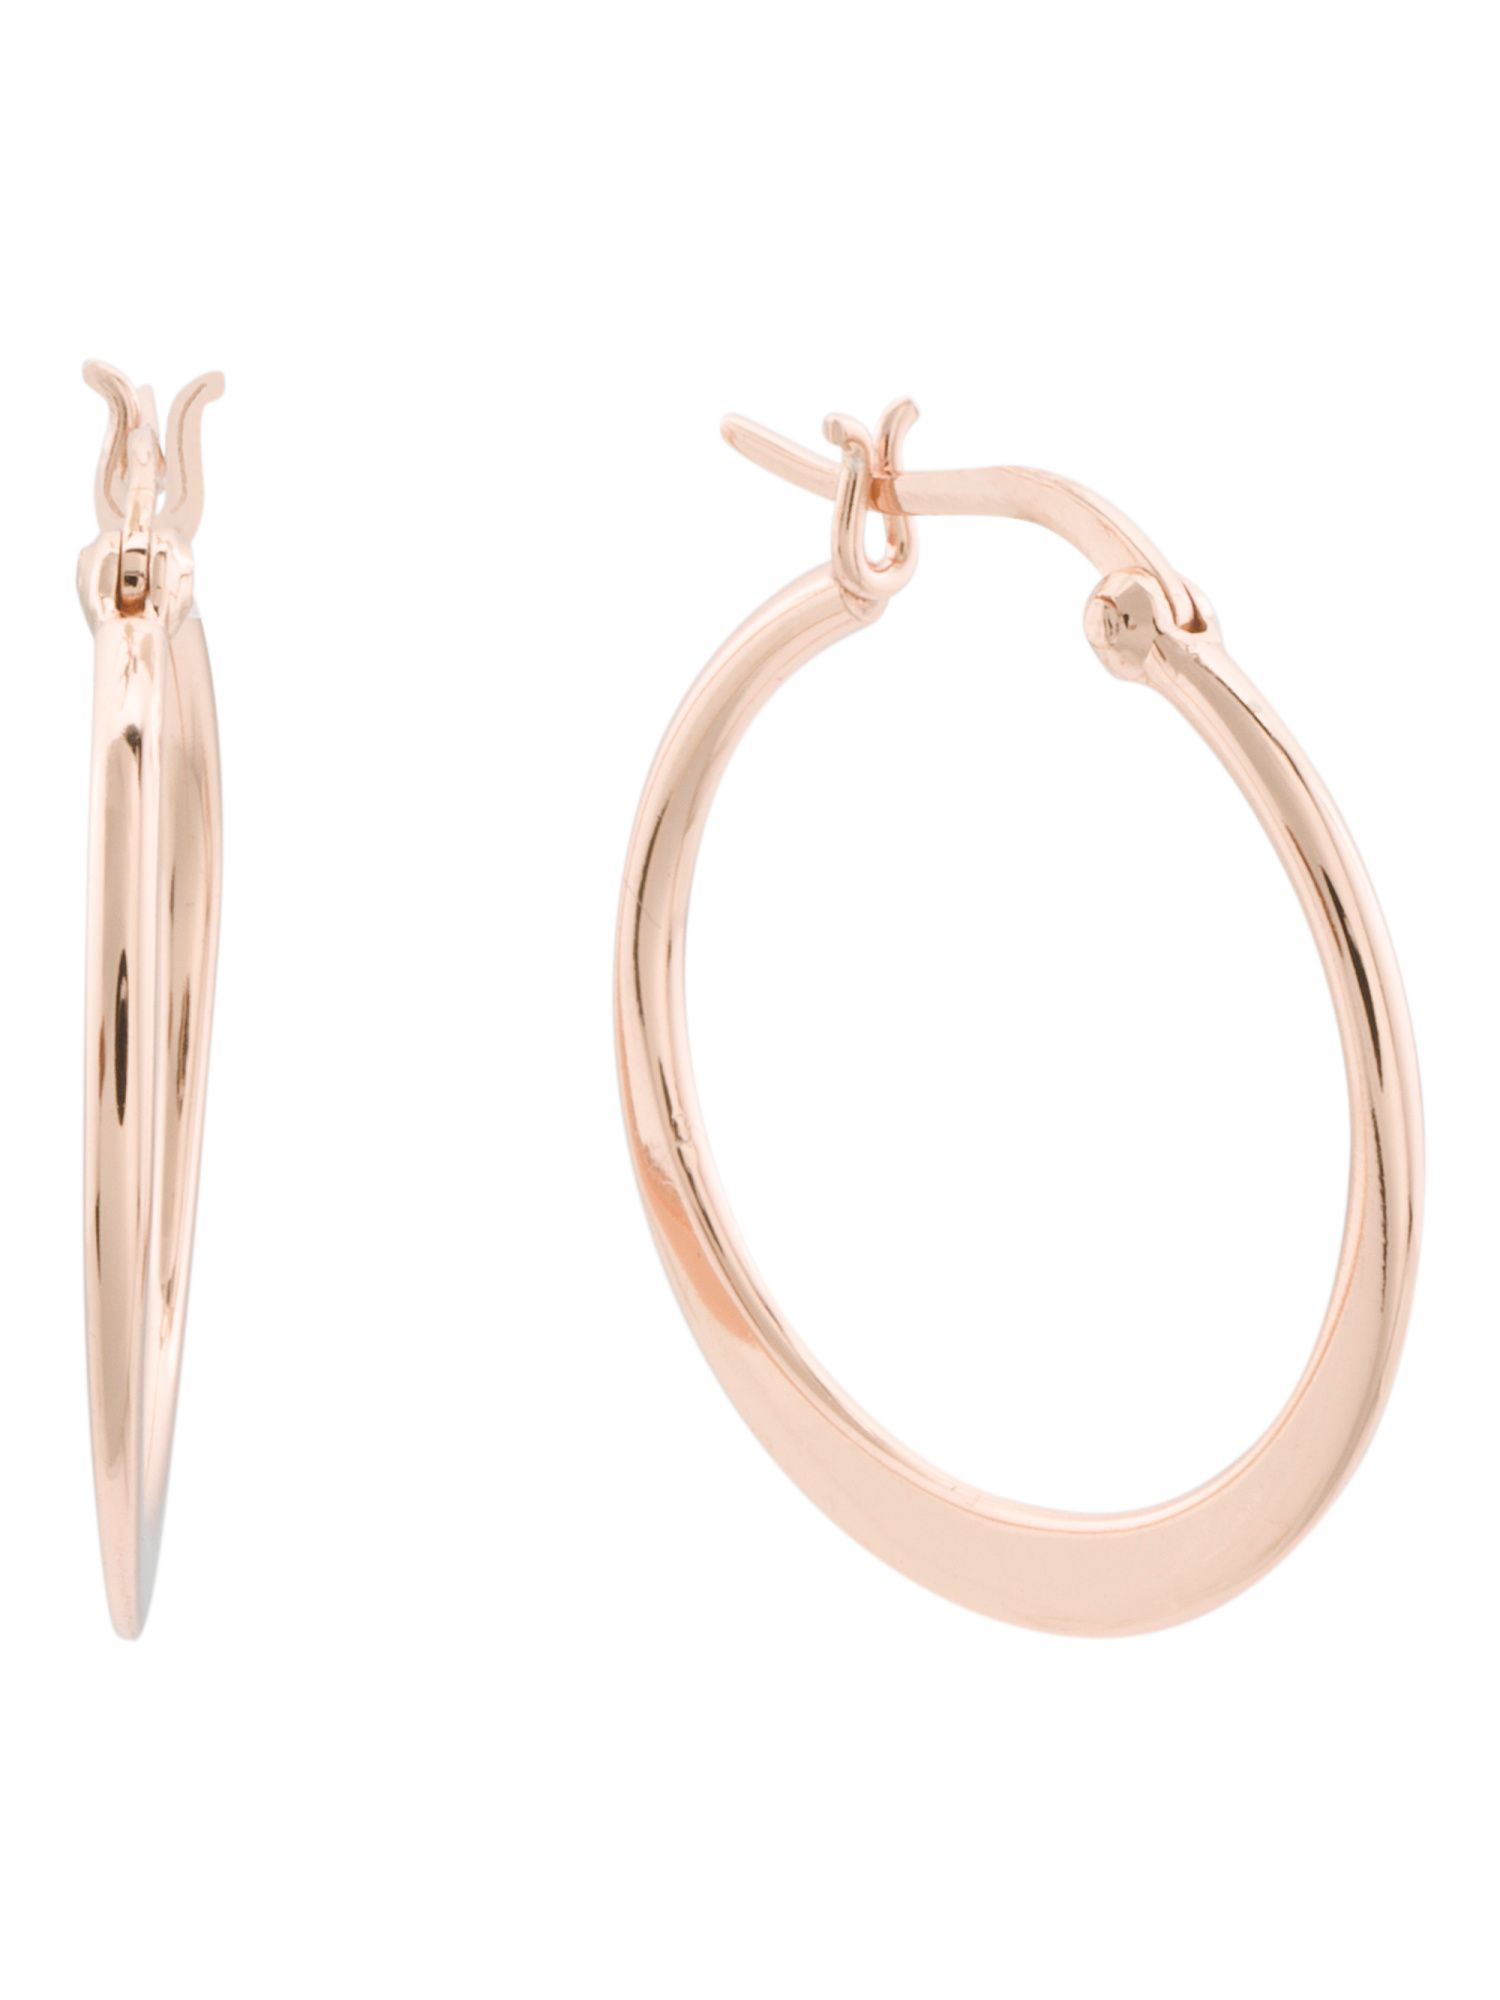 Made In Thailand 18k Rose Gold Plated 925 Hoop Earrings | TJ Maxx